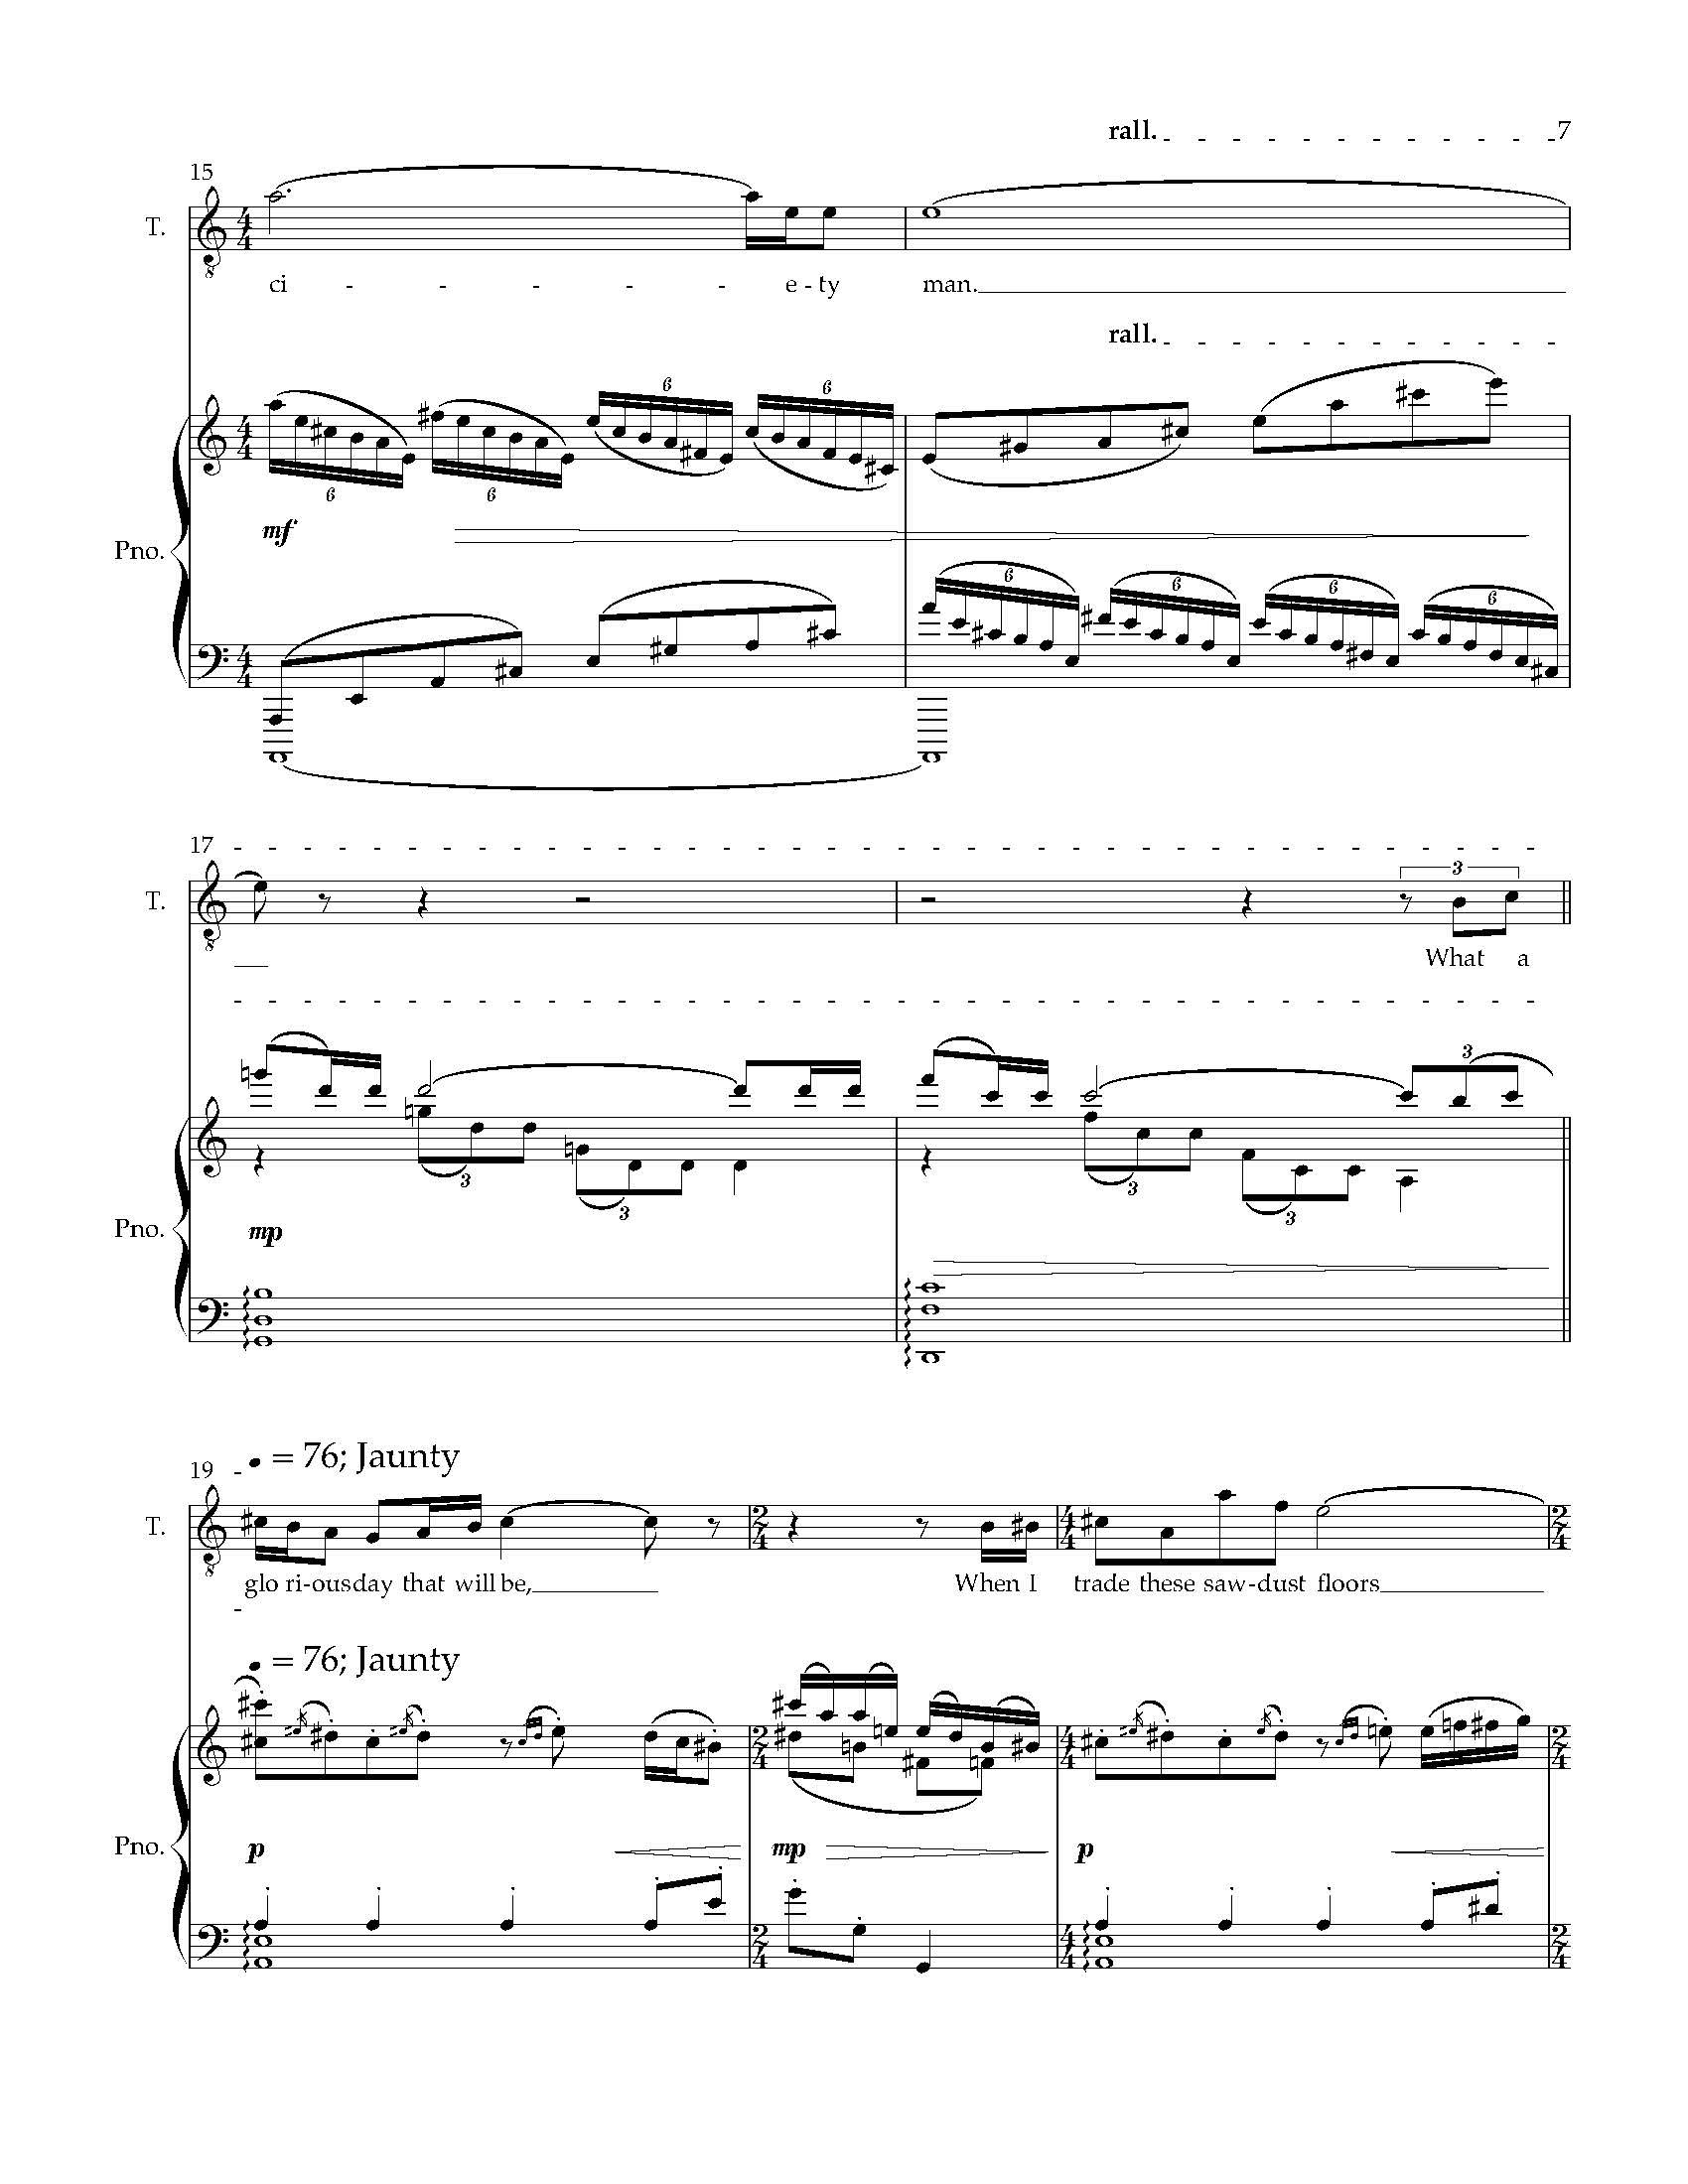 Five Arias from HWGS - Complete Score (1)_Page_11.jpg